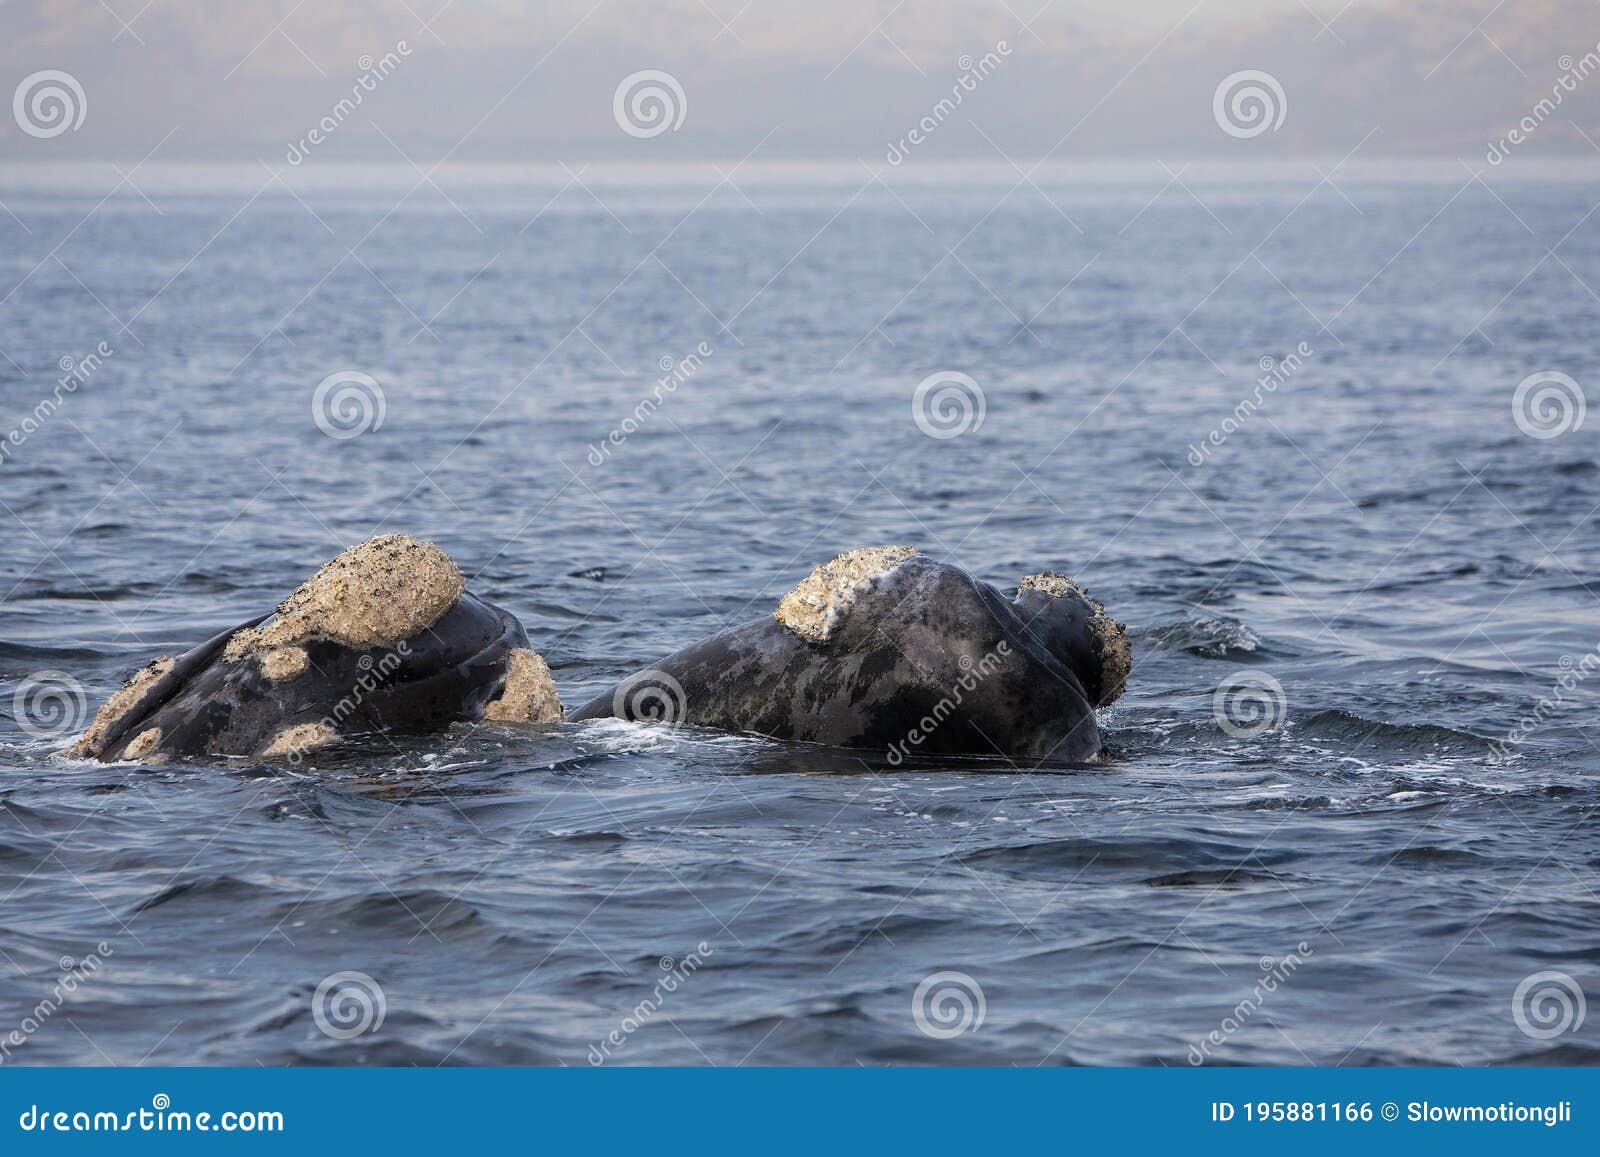 southern right whale, eubalaena australis, pair with head emerging from sea, hermanus in south africa